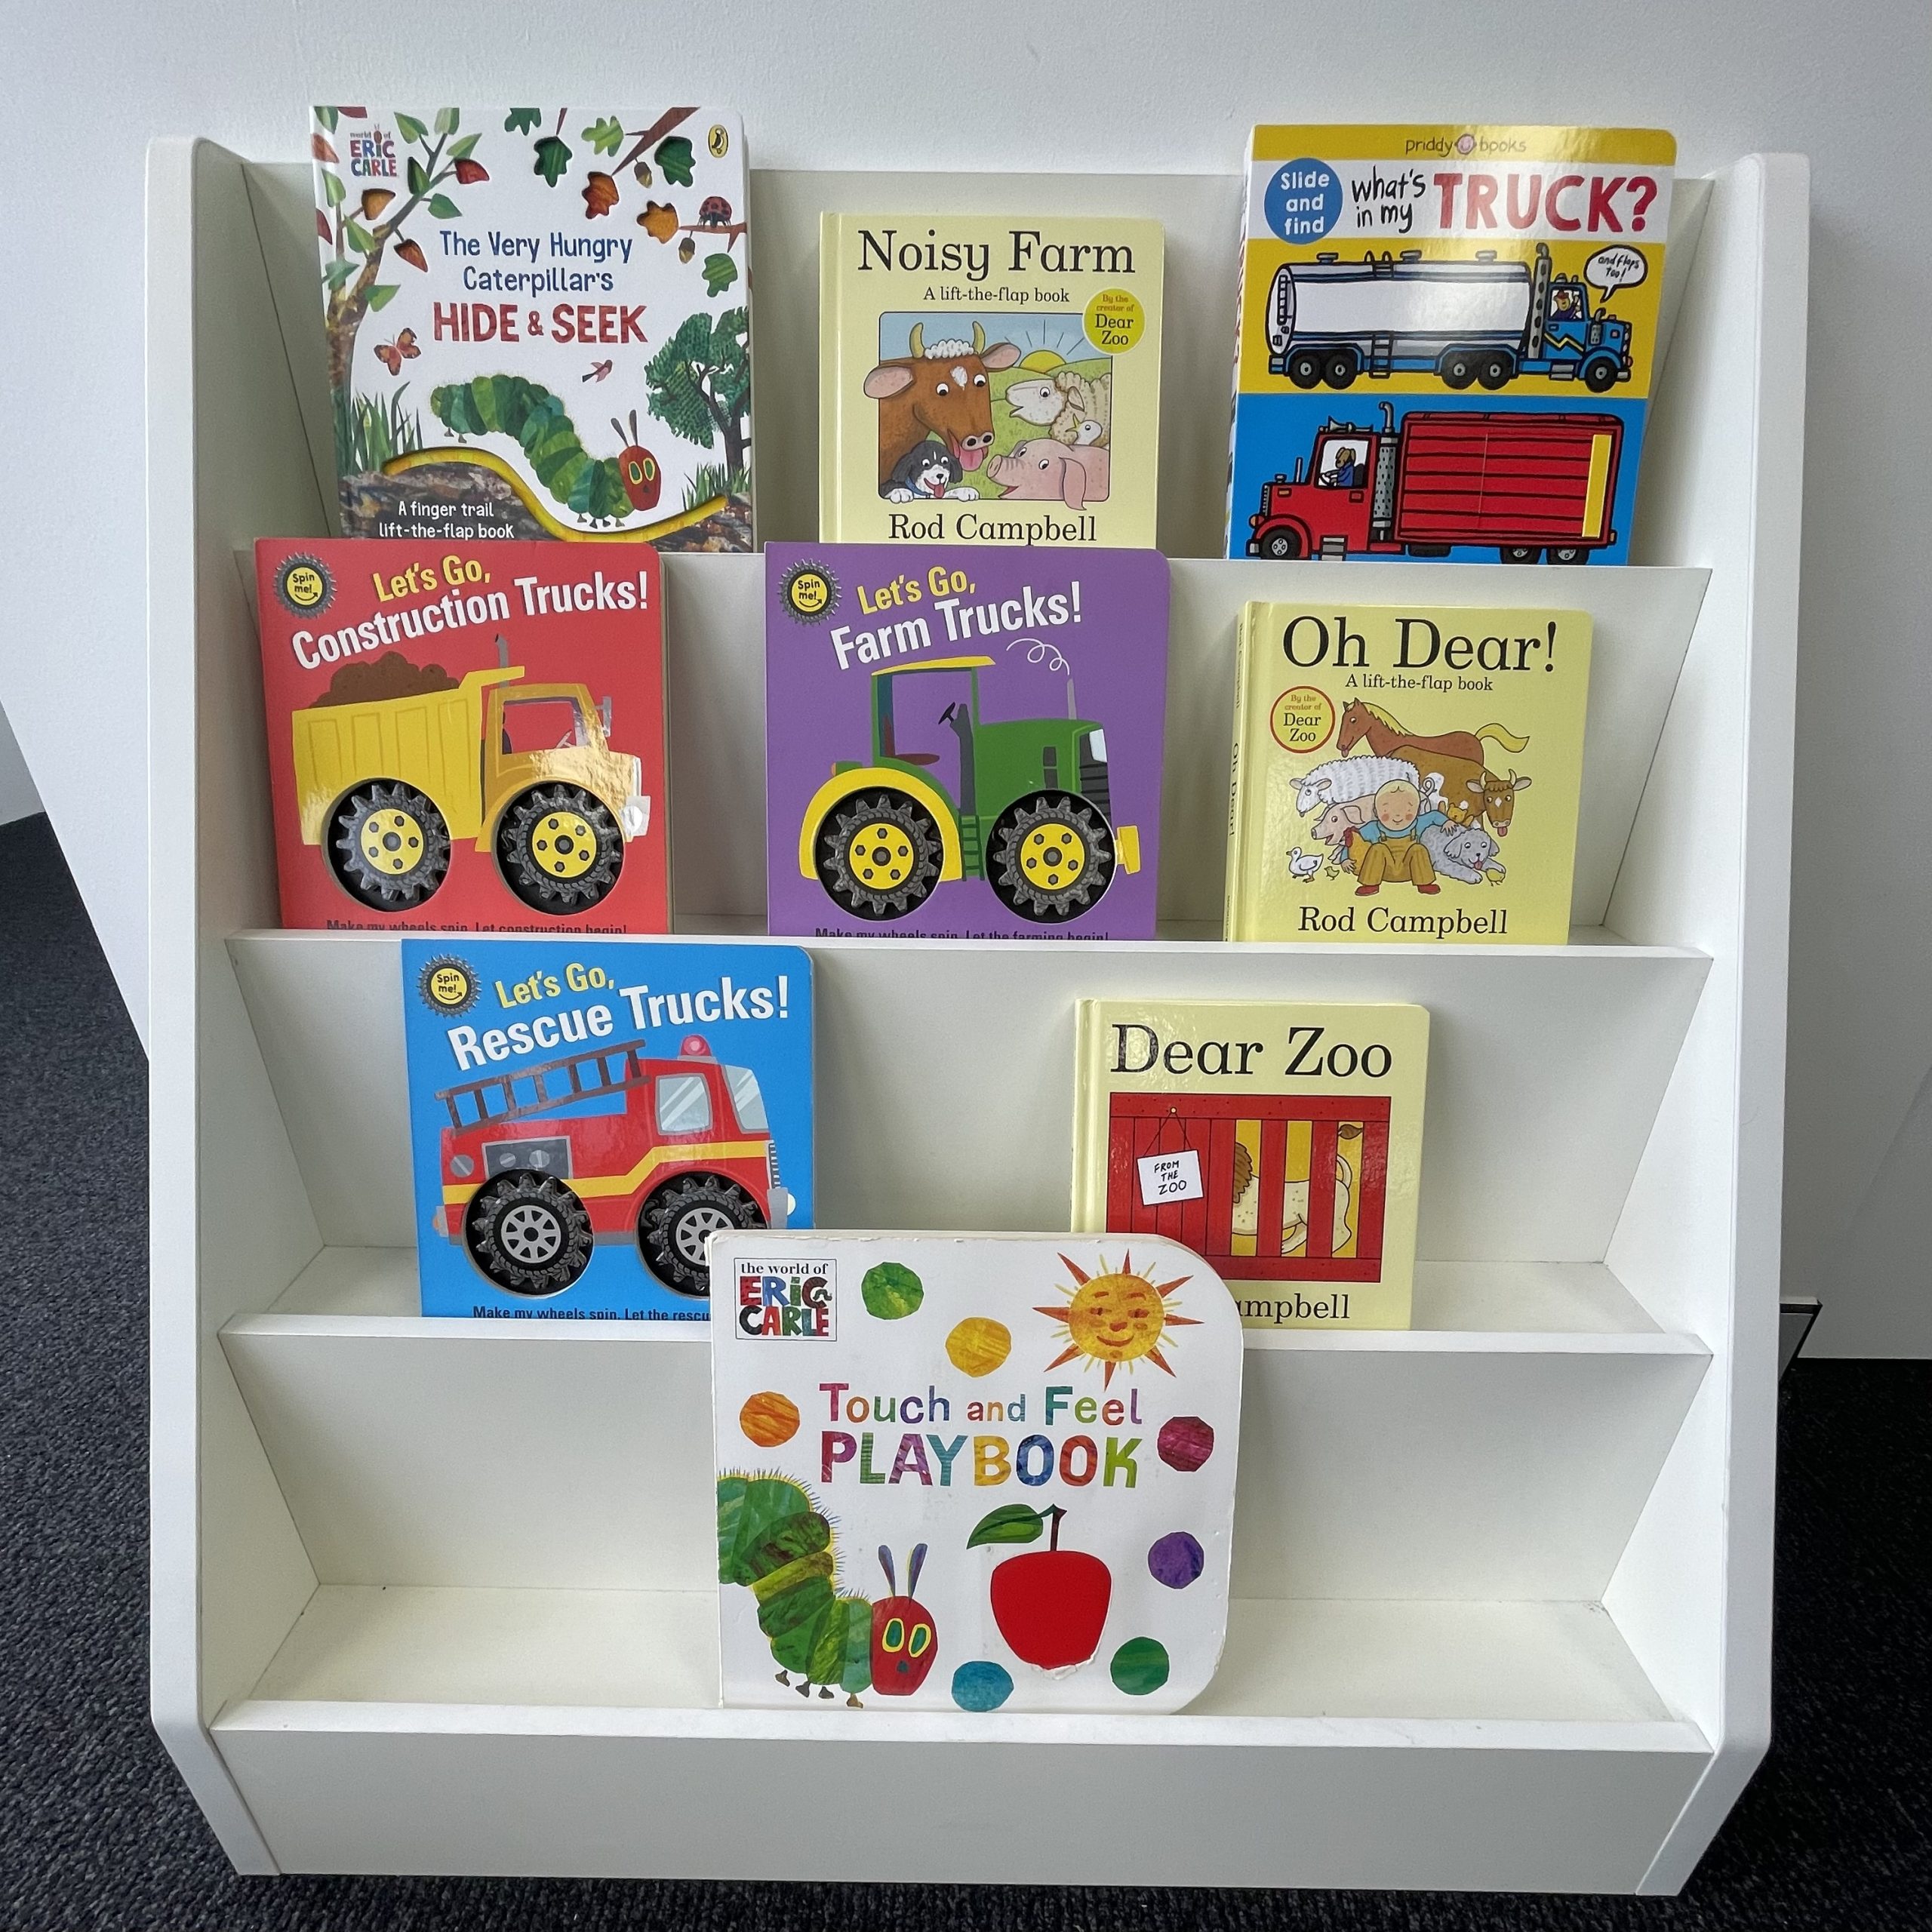 using books to increase vocabulary in young children